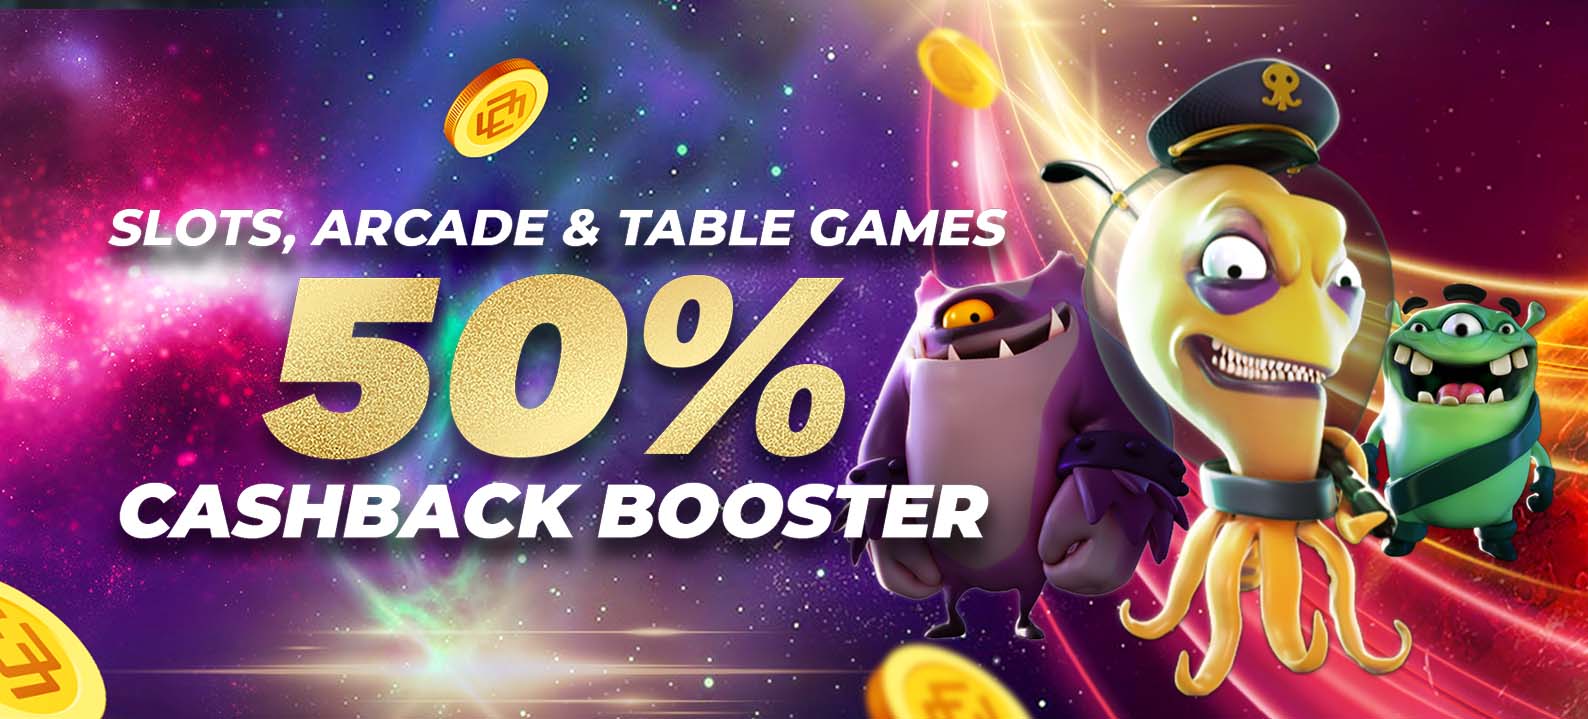 Arcade, Slots And Table Games Cashback Booster